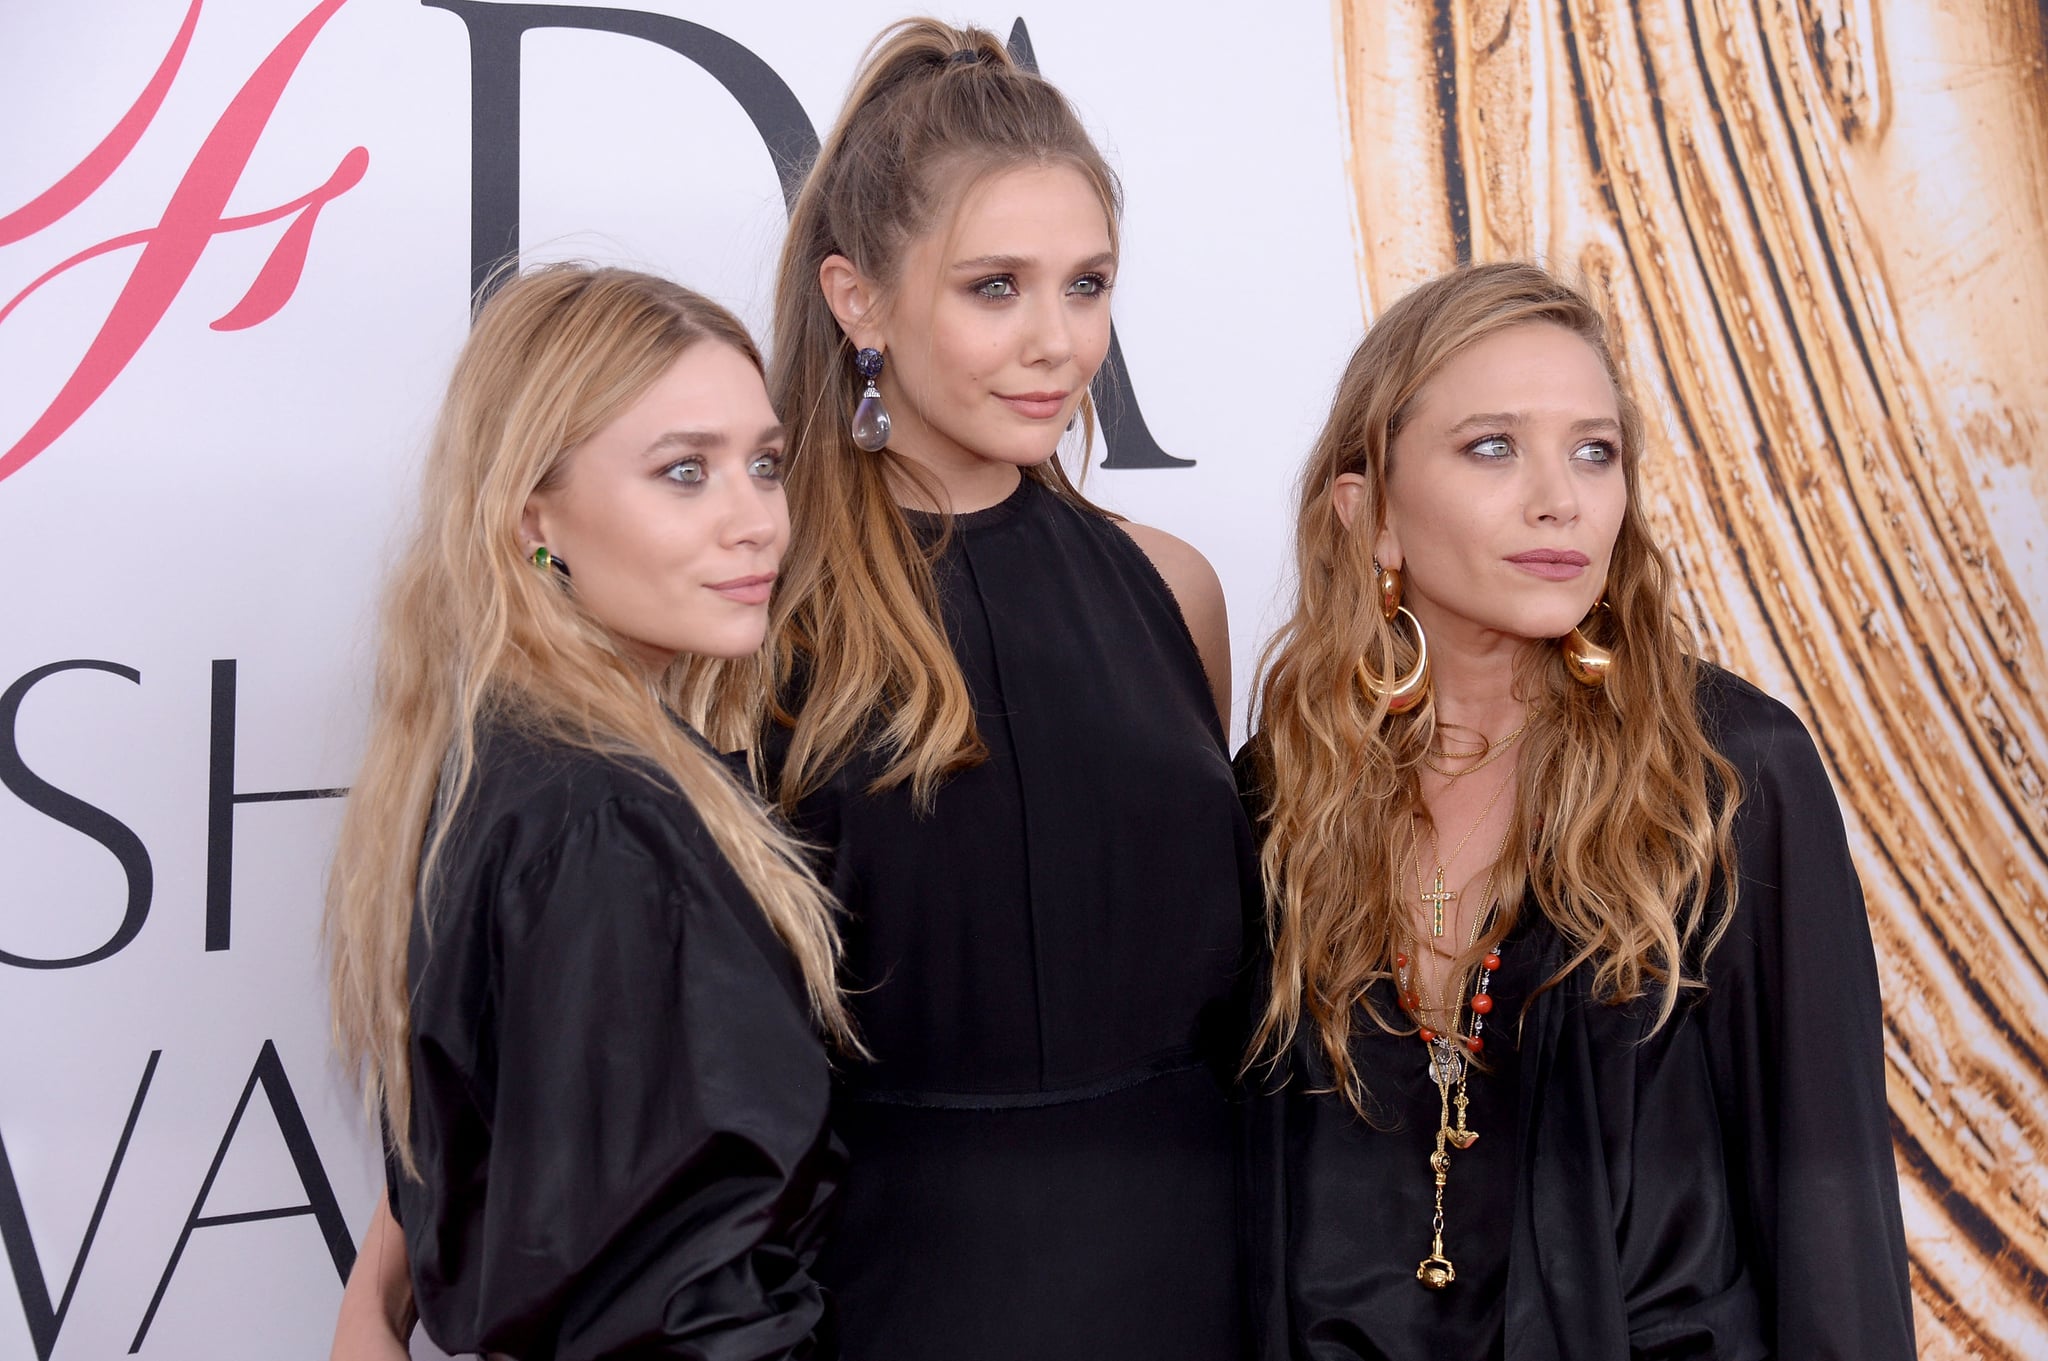 NEW YORK, NY - JUNE 06:  Elizabeth Olsen (centre) and Mary-Kate and Ashley Olsen attend the 2016 CFDA Fashion Awards at the Hammerstein Ballroom on June 6, 2016 in New York City.  (Photo by Clint Spaulding/Patrick McMullan via Getty Images)